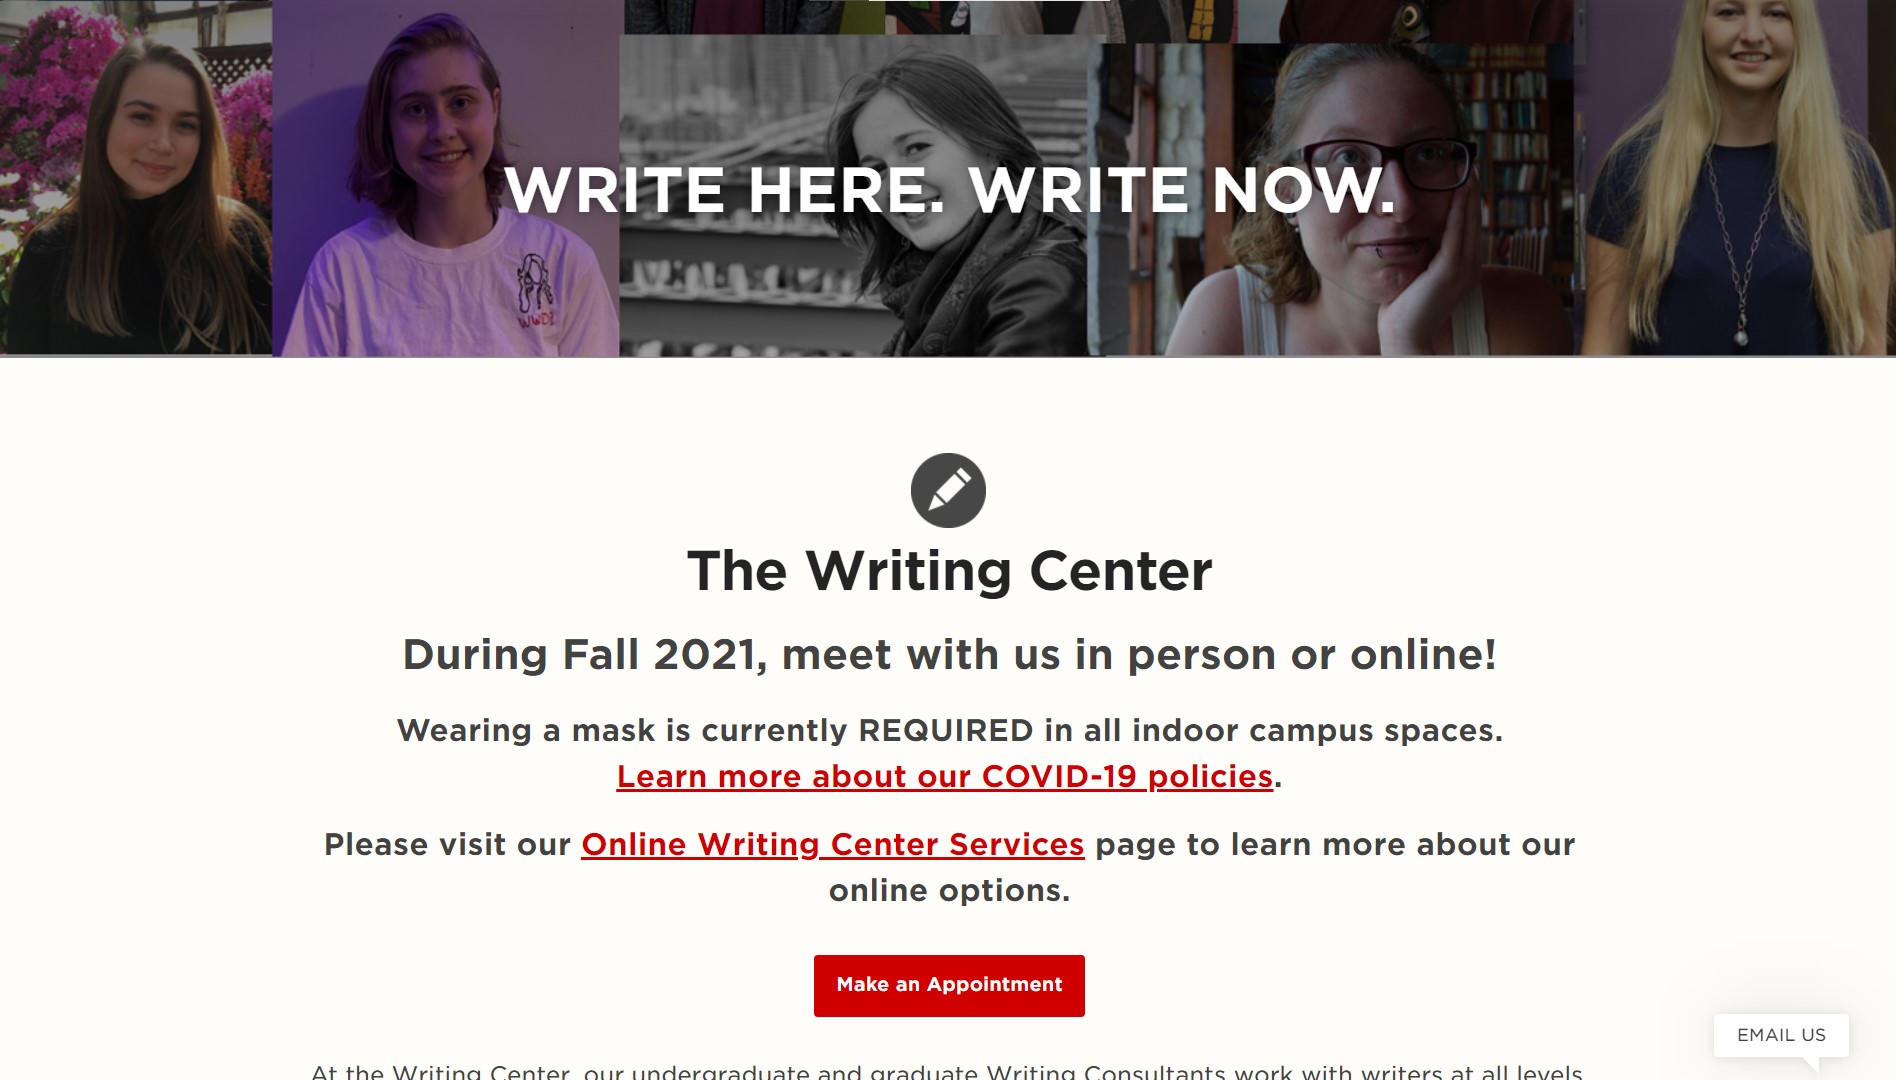 Writing Center Consultant Applications Open!